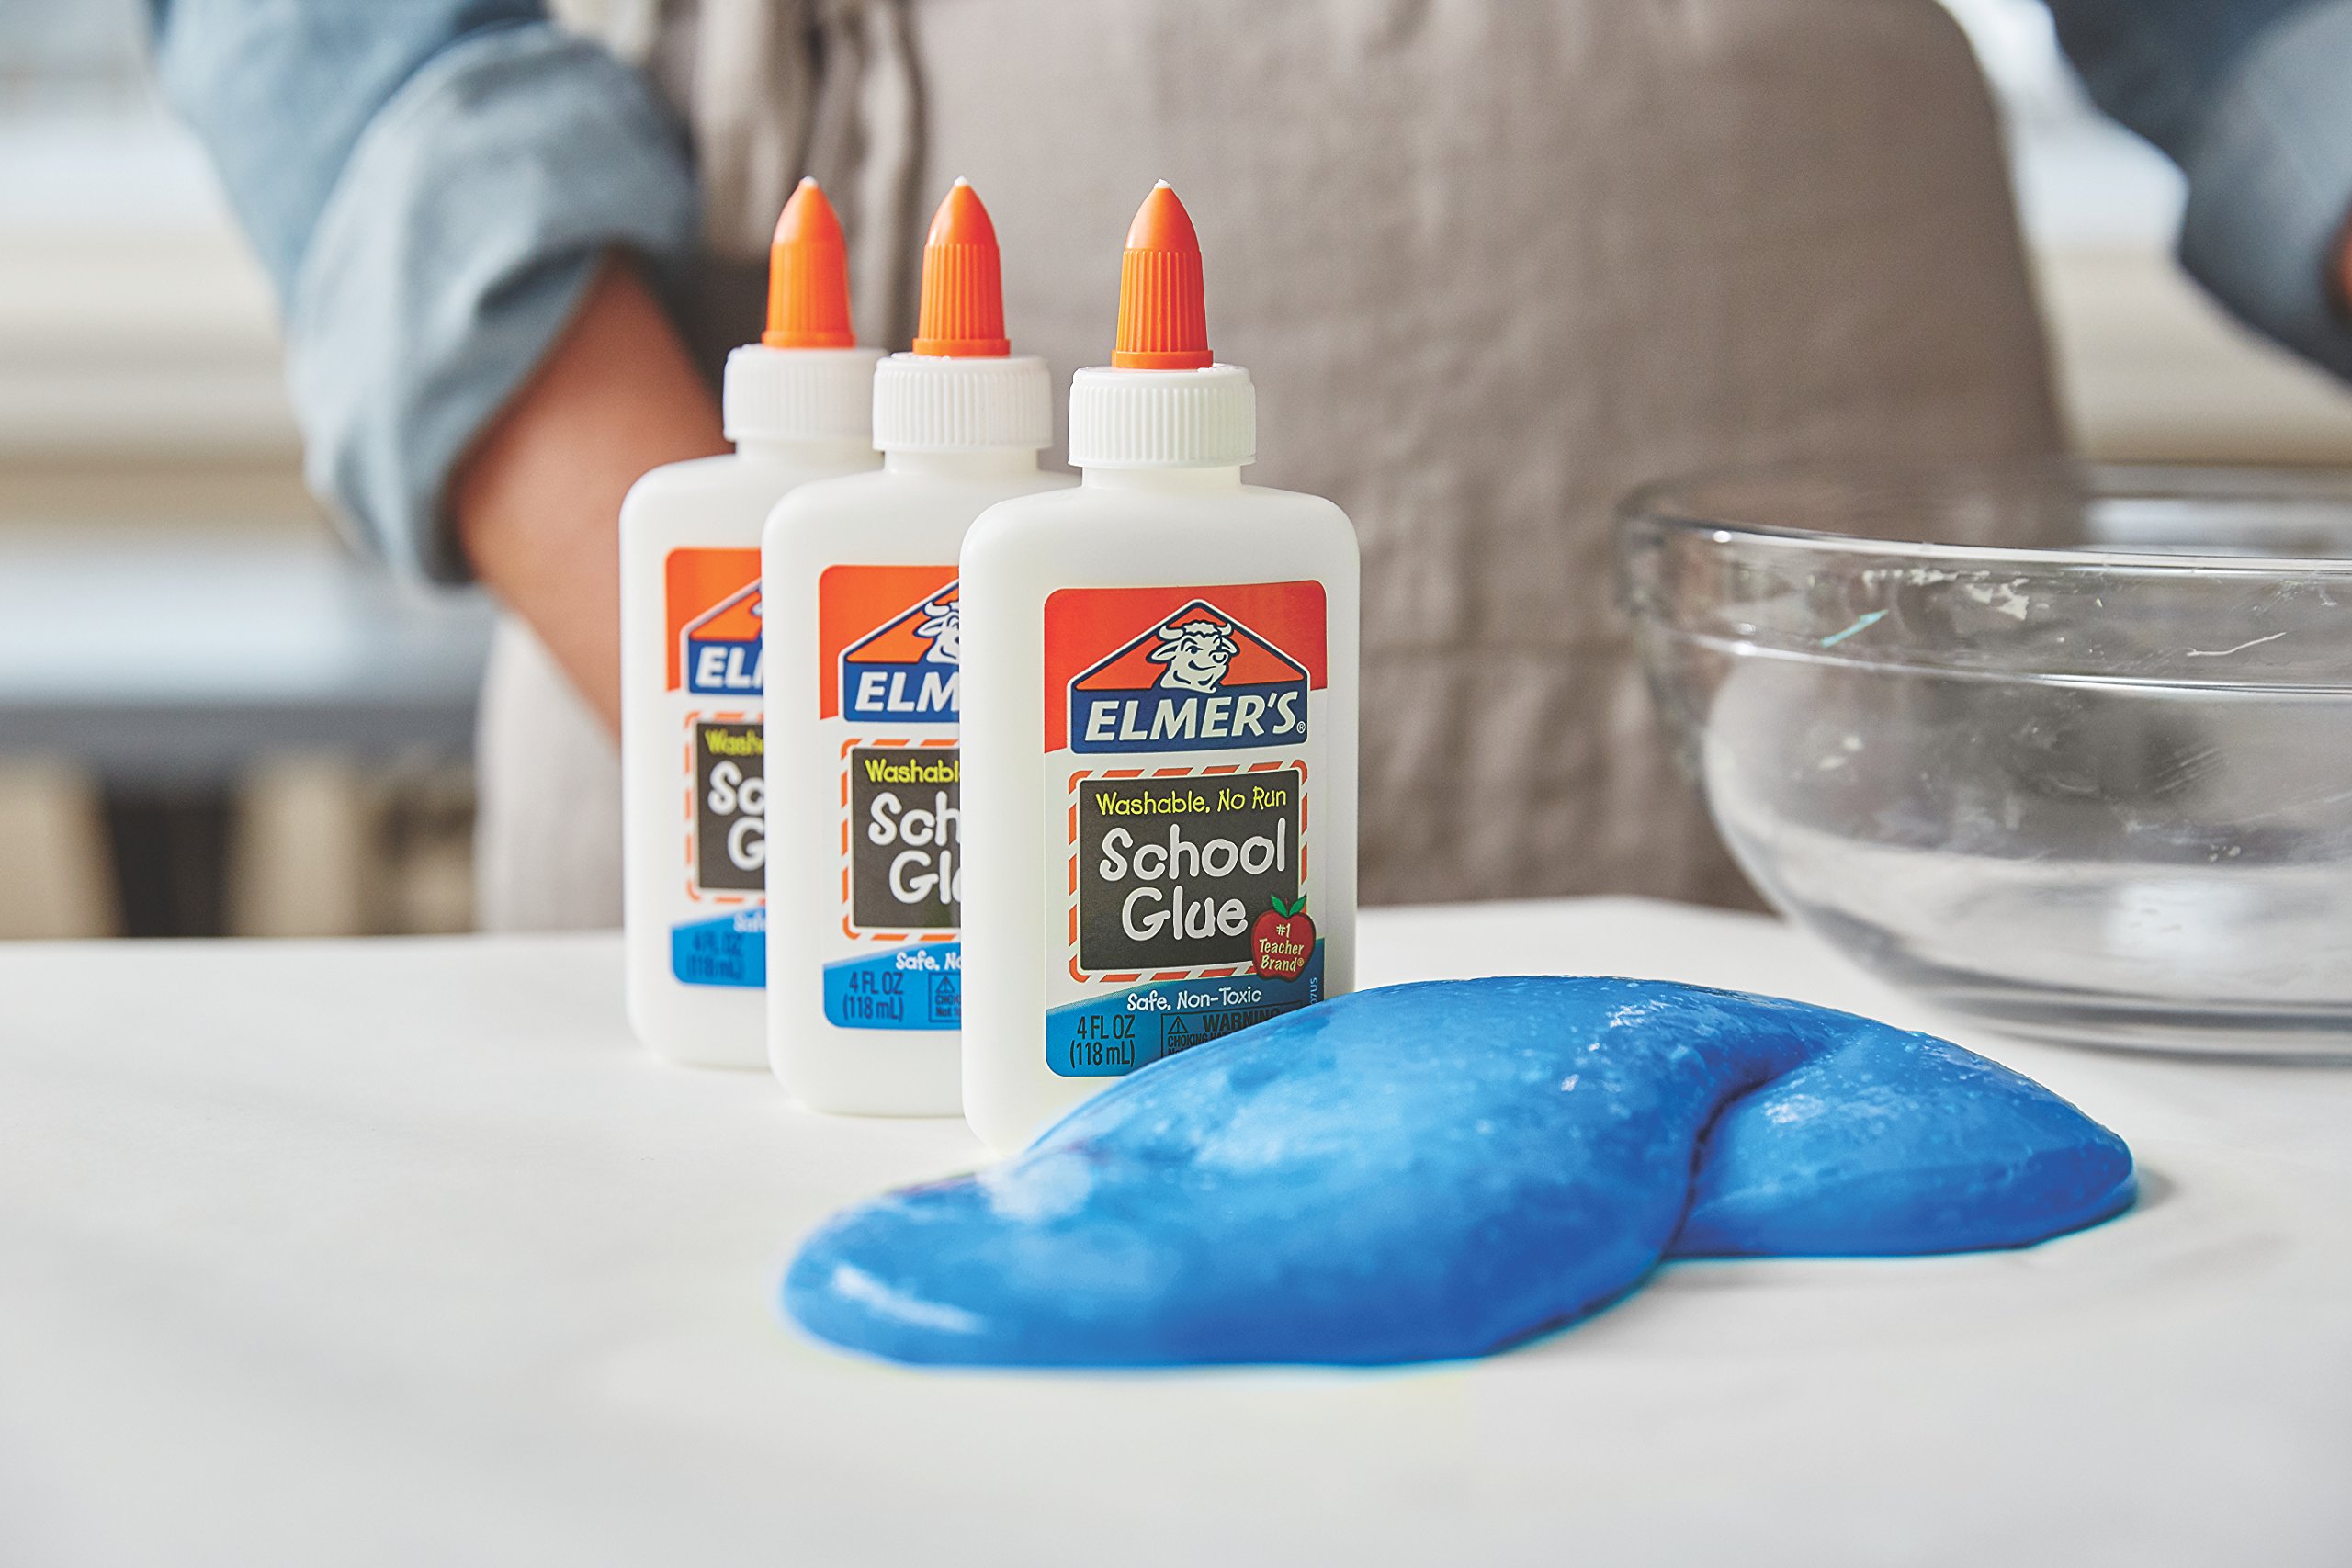 Elmer's Liquid School Glue, Washable, 4 Ounces Each, 12 Count - Great for Making Slime